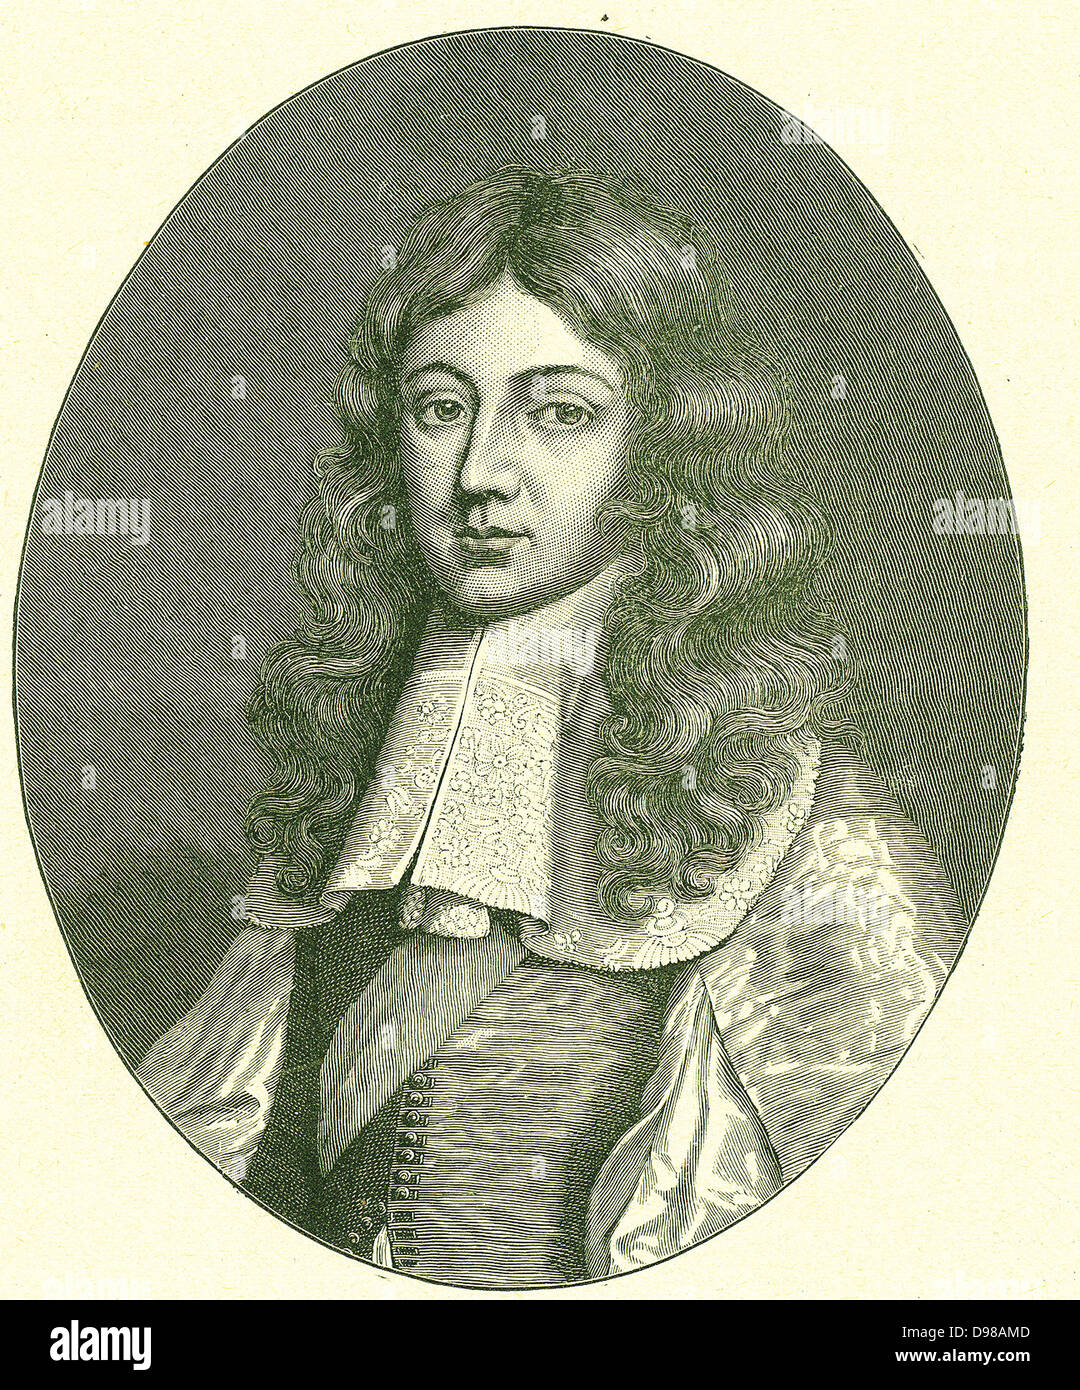 James, Duke of Monmouth (1649-1685) illegitimate son of Charles II and Lucy Walter. On his father's death he claimed the throne. After the failure of the Monmouth Rebellion he was executed on Tower Hill, London. Stock Photo